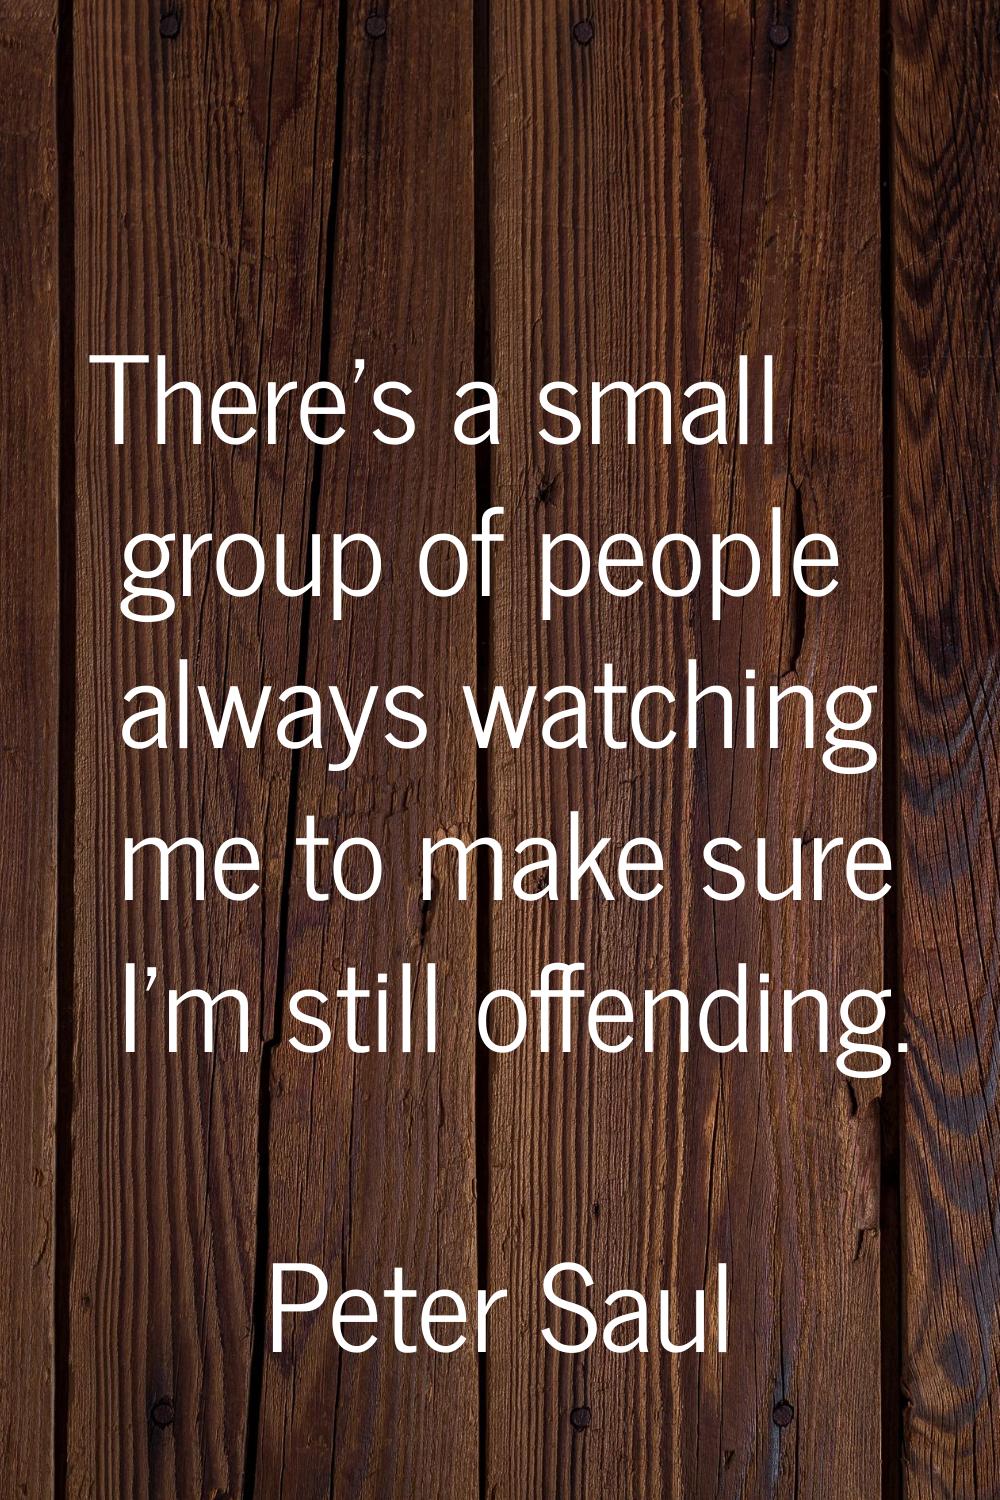 There's a small group of people always watching me to make sure I'm still offending.